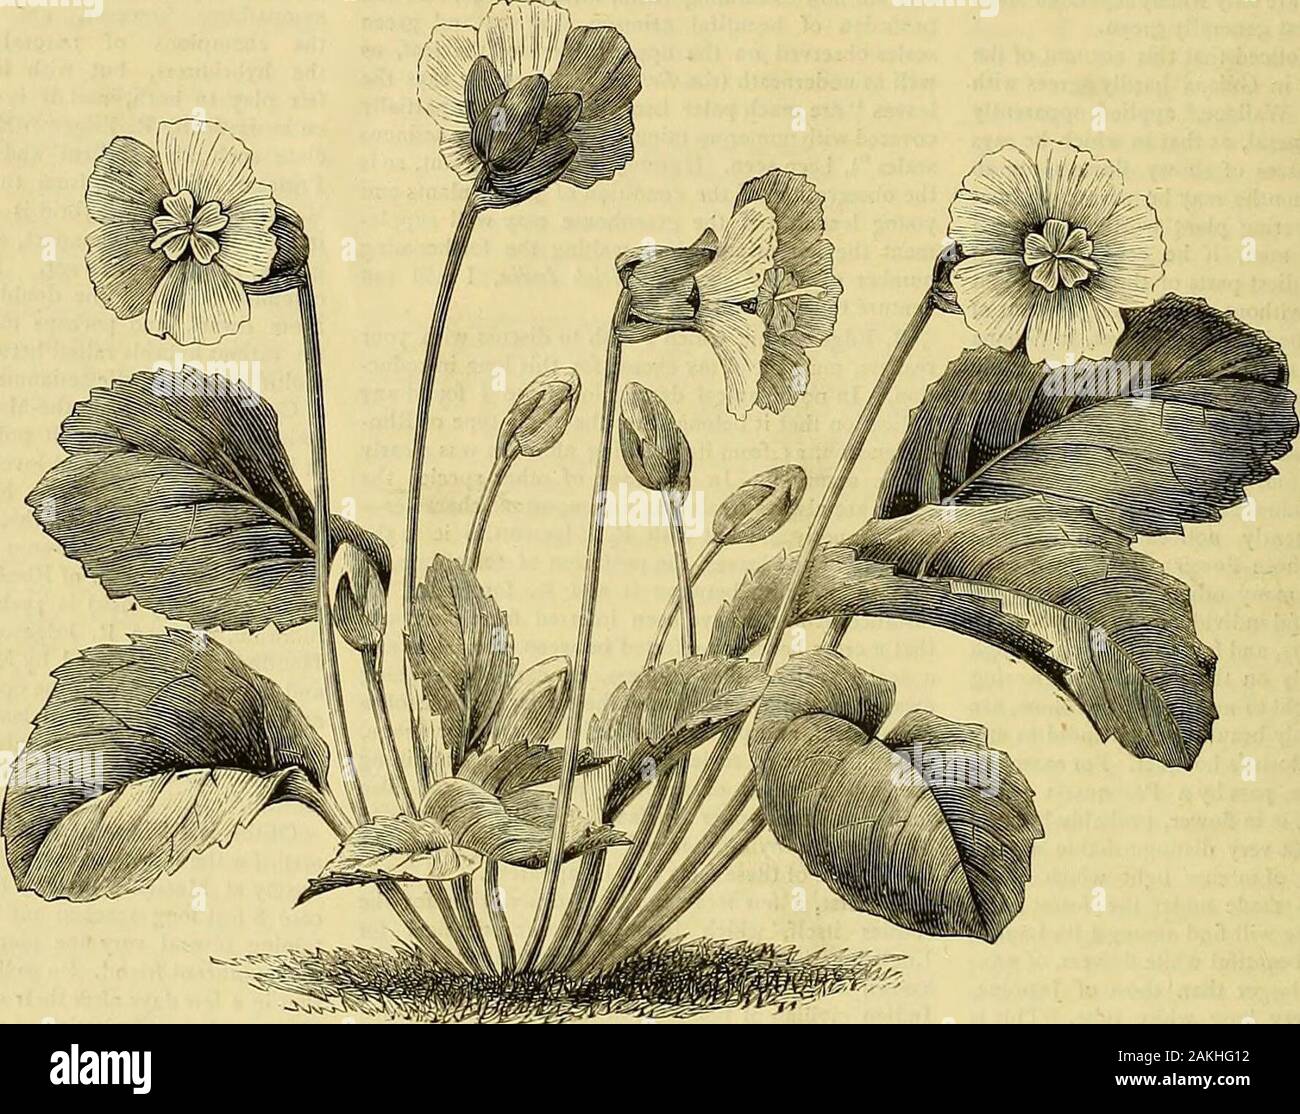 The Gardeners' chronicle : a weekly illustrated journal of horticulture and allied subjects . inch). Theflowers occur singly on the ends of leafless stalks orscapes, emerging from among and exceeding in heightthe tuft of leaves. The bell-shaped flowers have threesmall bracts close to the calyx. They are about aninch in diameter when expanded, pure white, shadinginto rose colour as they wither. The botanicalstructure is interesting, by reason of the imbricatecalyx, the verticillate petals, and the curious row of rr. Fig. 109.—shortia galacifolia ; flowers pale rose. to the Atlantic States of No Stock Photo